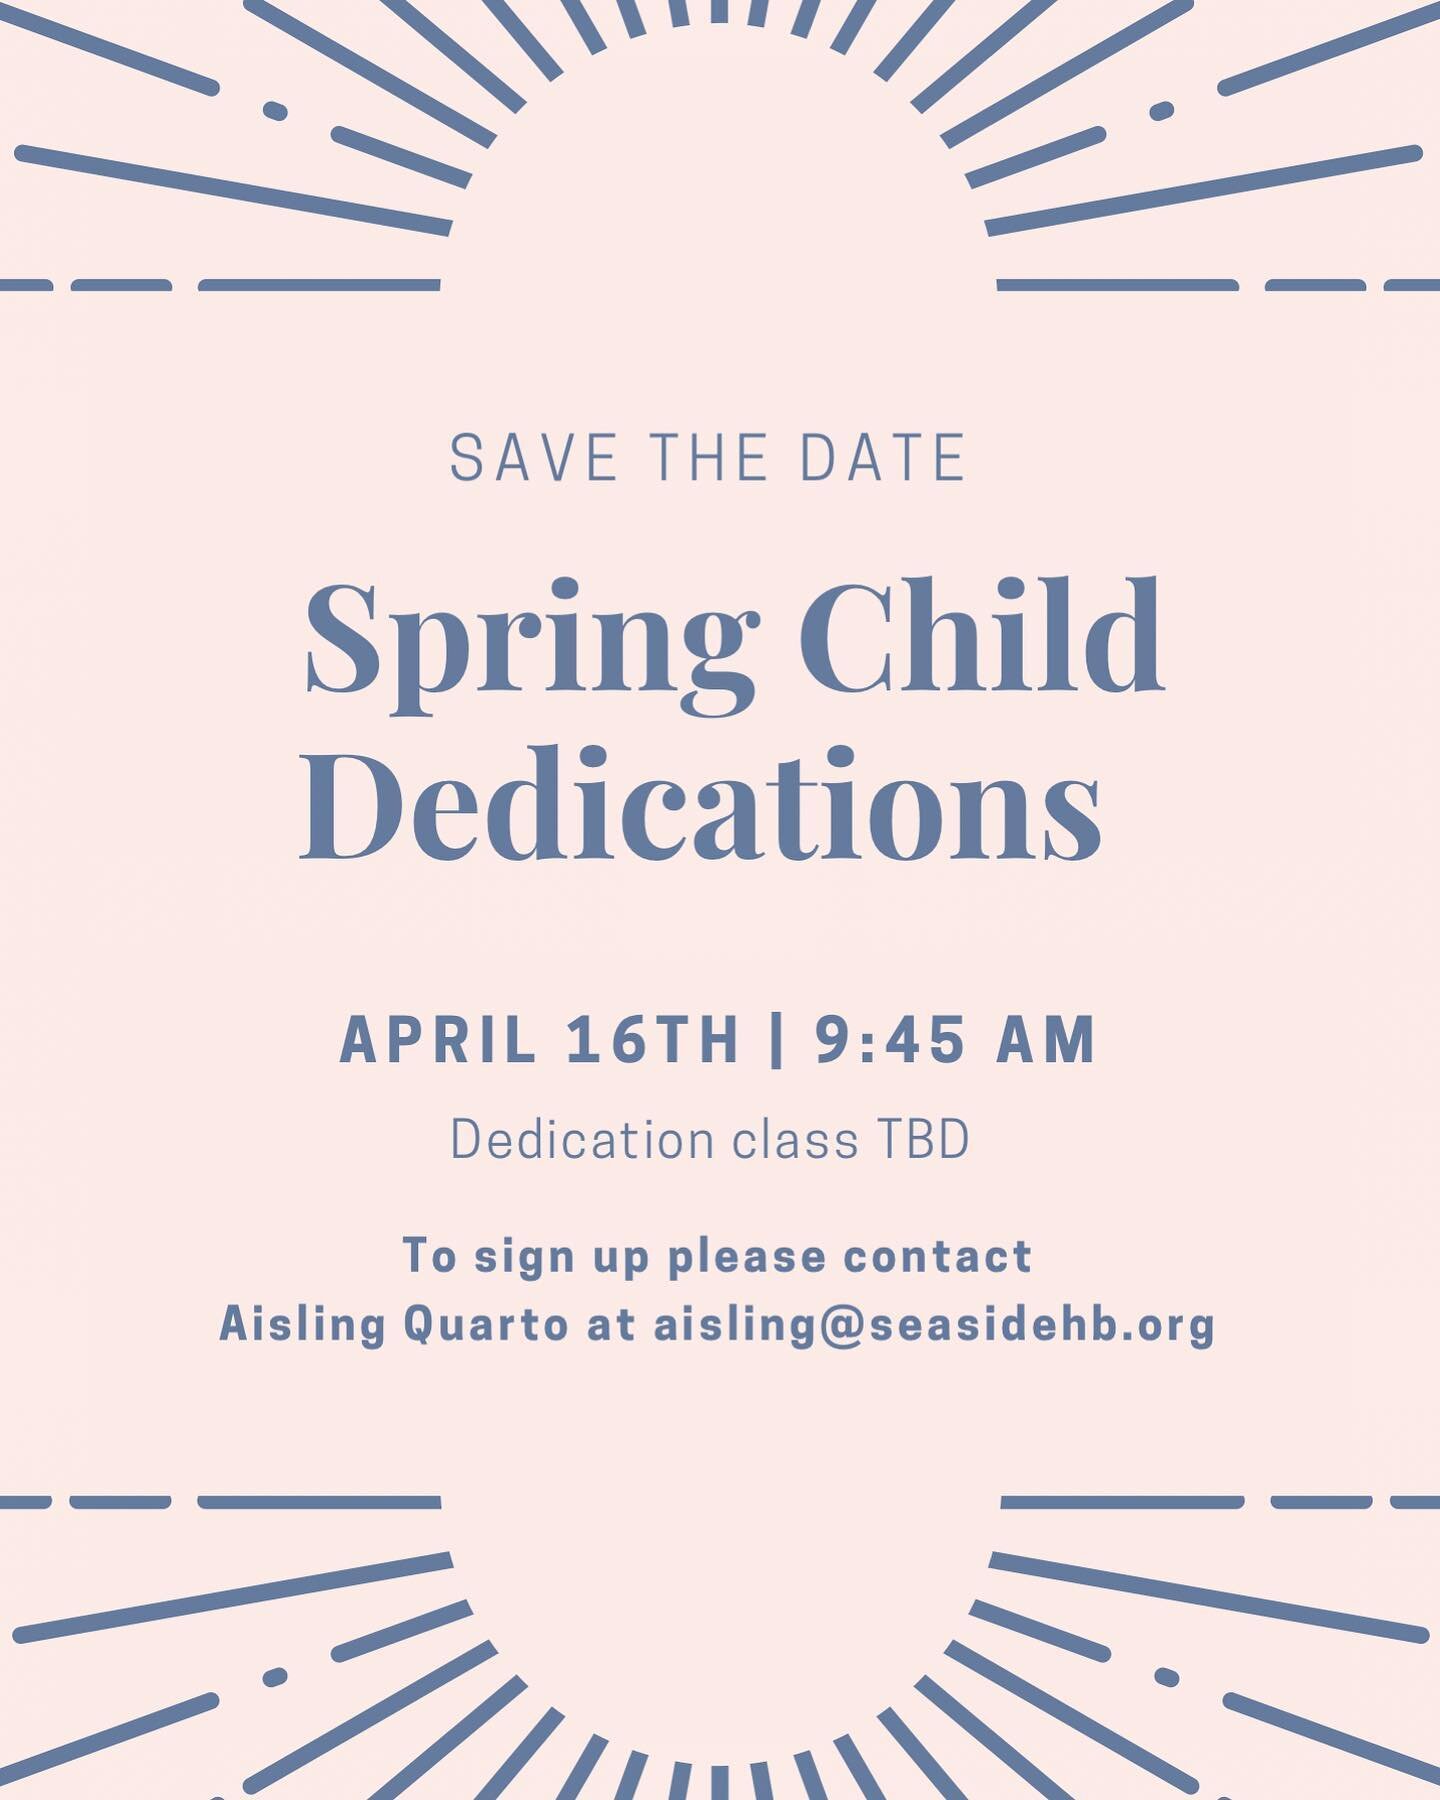 Hosting our Spring Child Dedications on April 16th during our Sunday gathering. If you are interested in having your child dedicated please reach out to our Children&rsquo;s Director at aisling@seasidehb.org